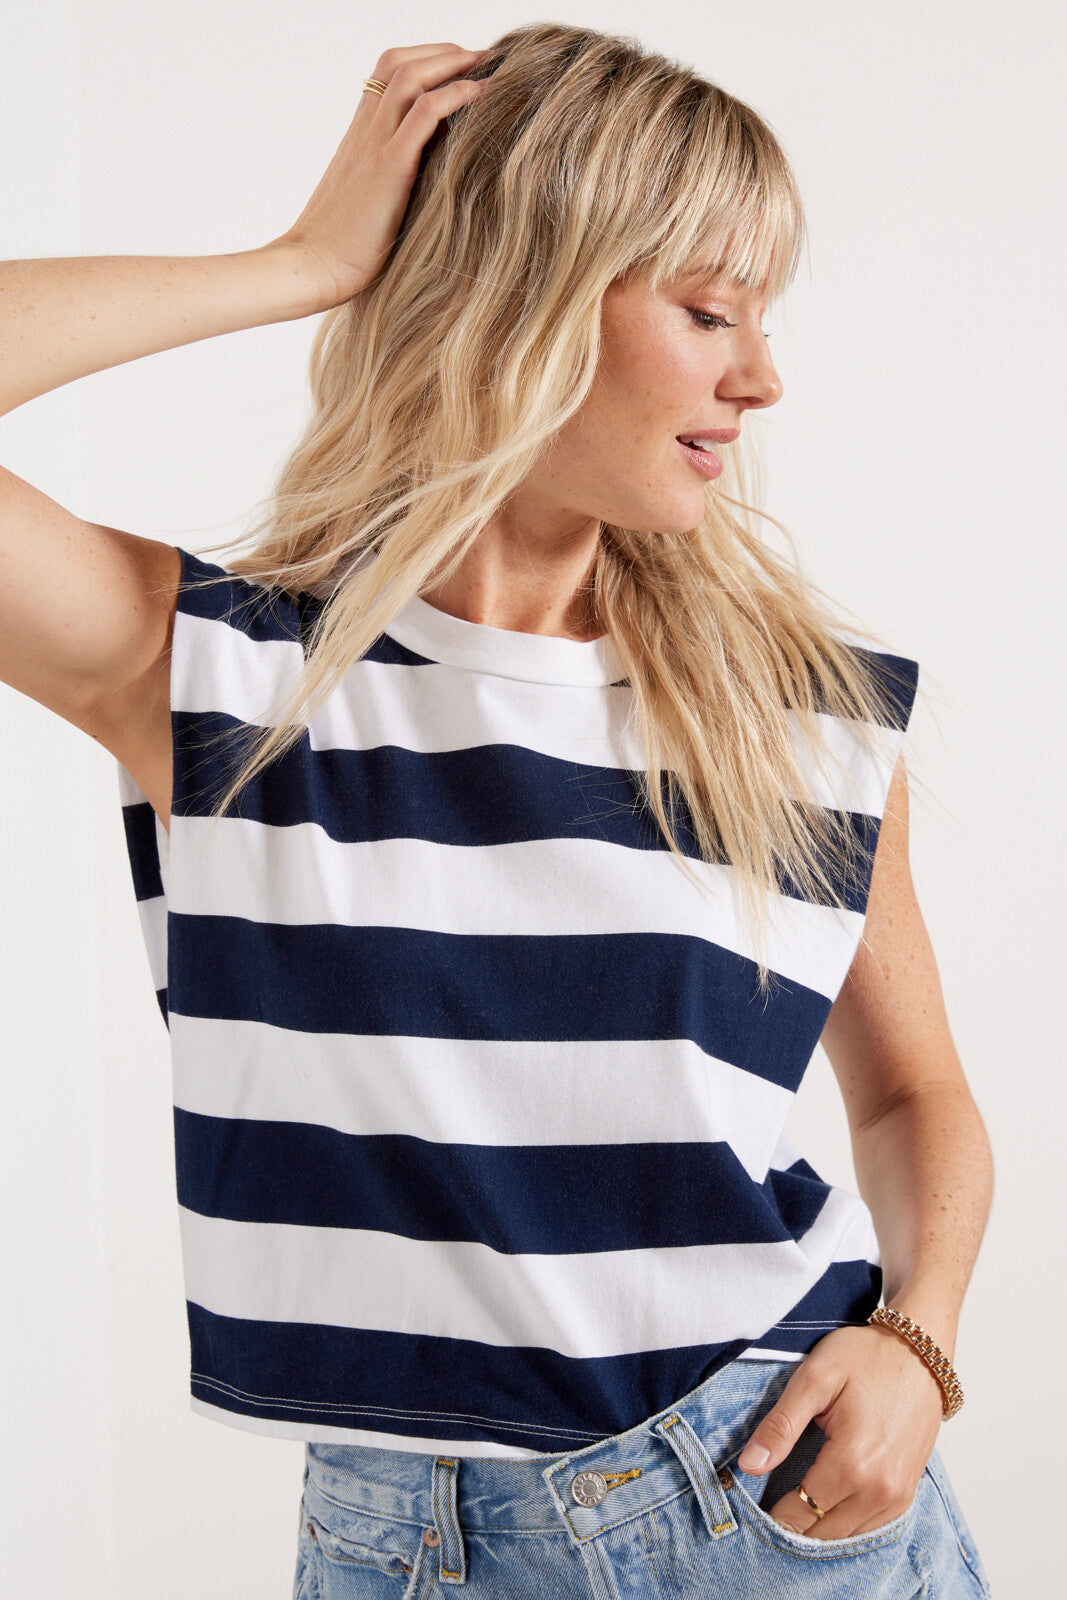 Stateside Navy Rugby Stripe Cropped Muscle Tee 5555